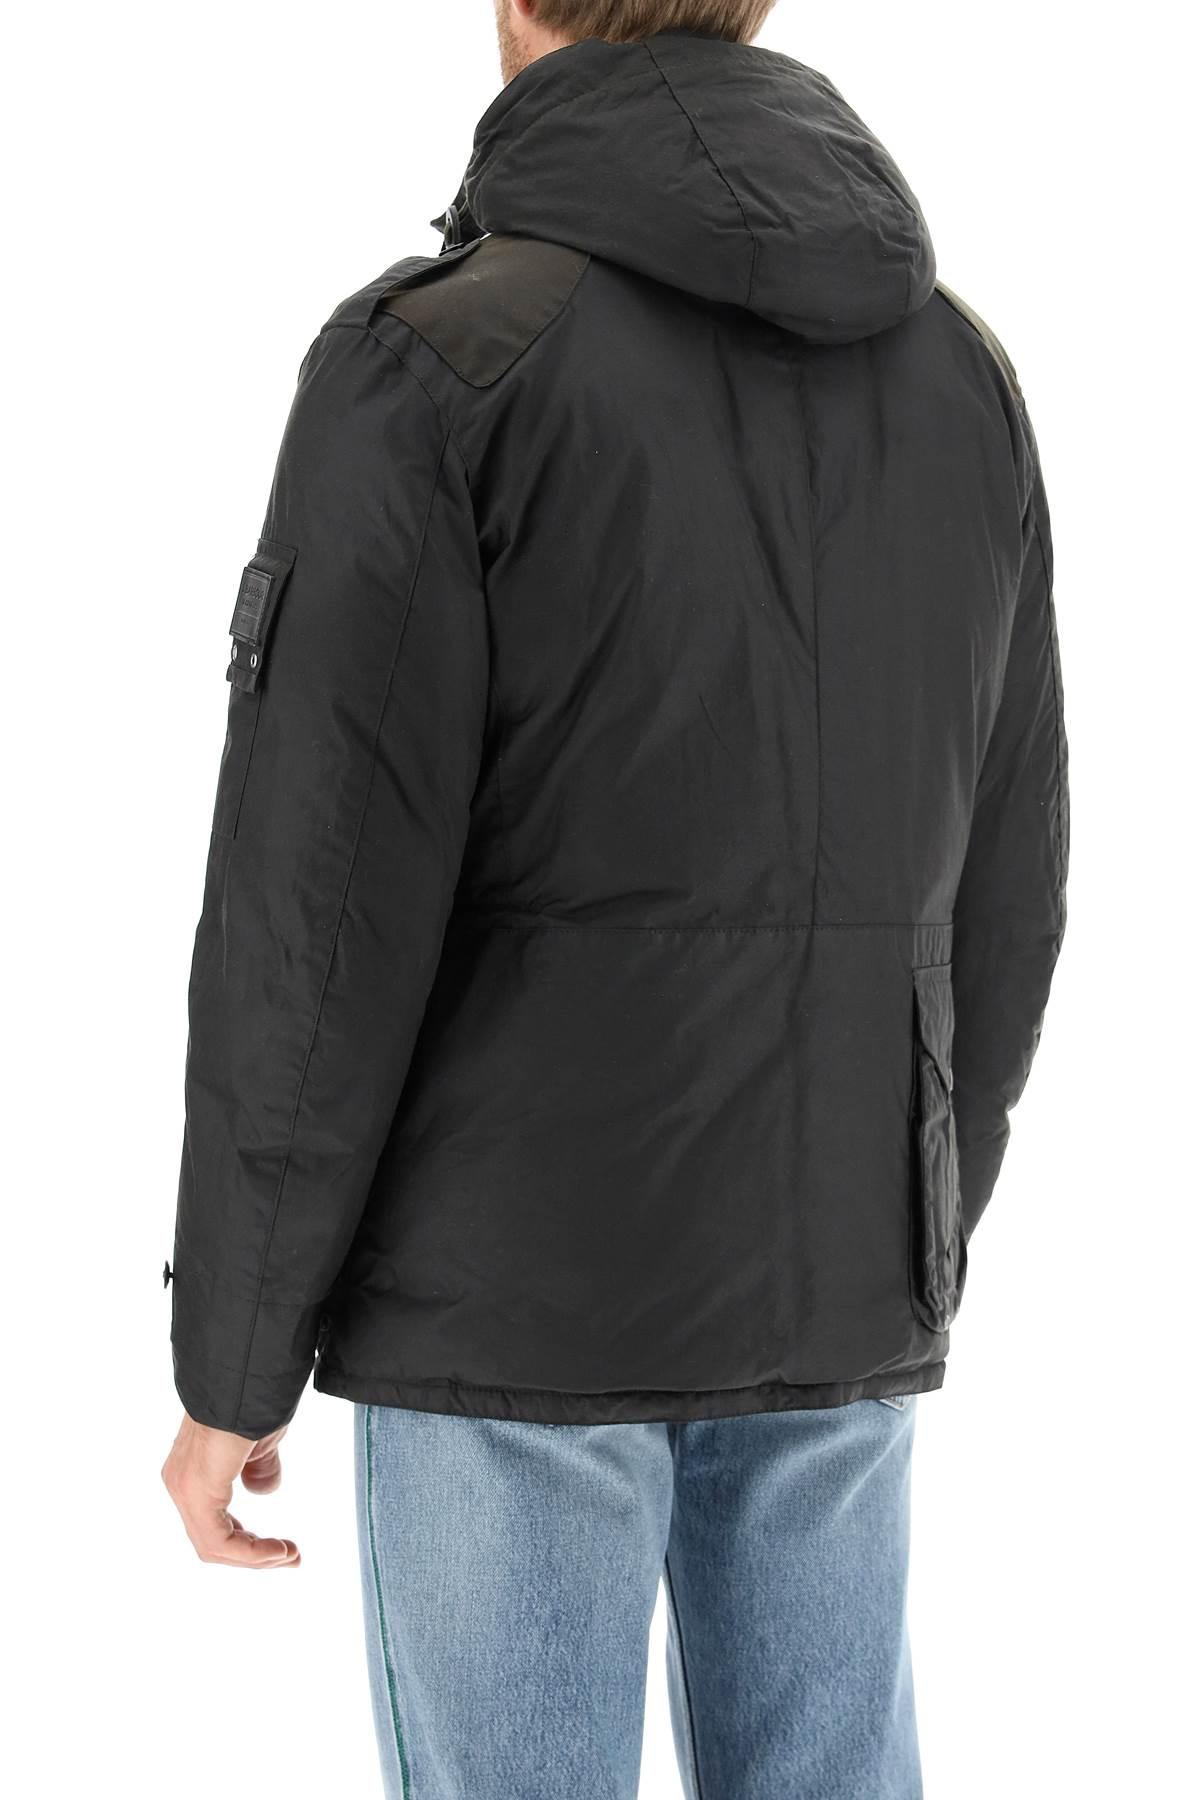 BARBOUR GOLD STANDARD Canna Wax Jacket in Black for Men | Lyst